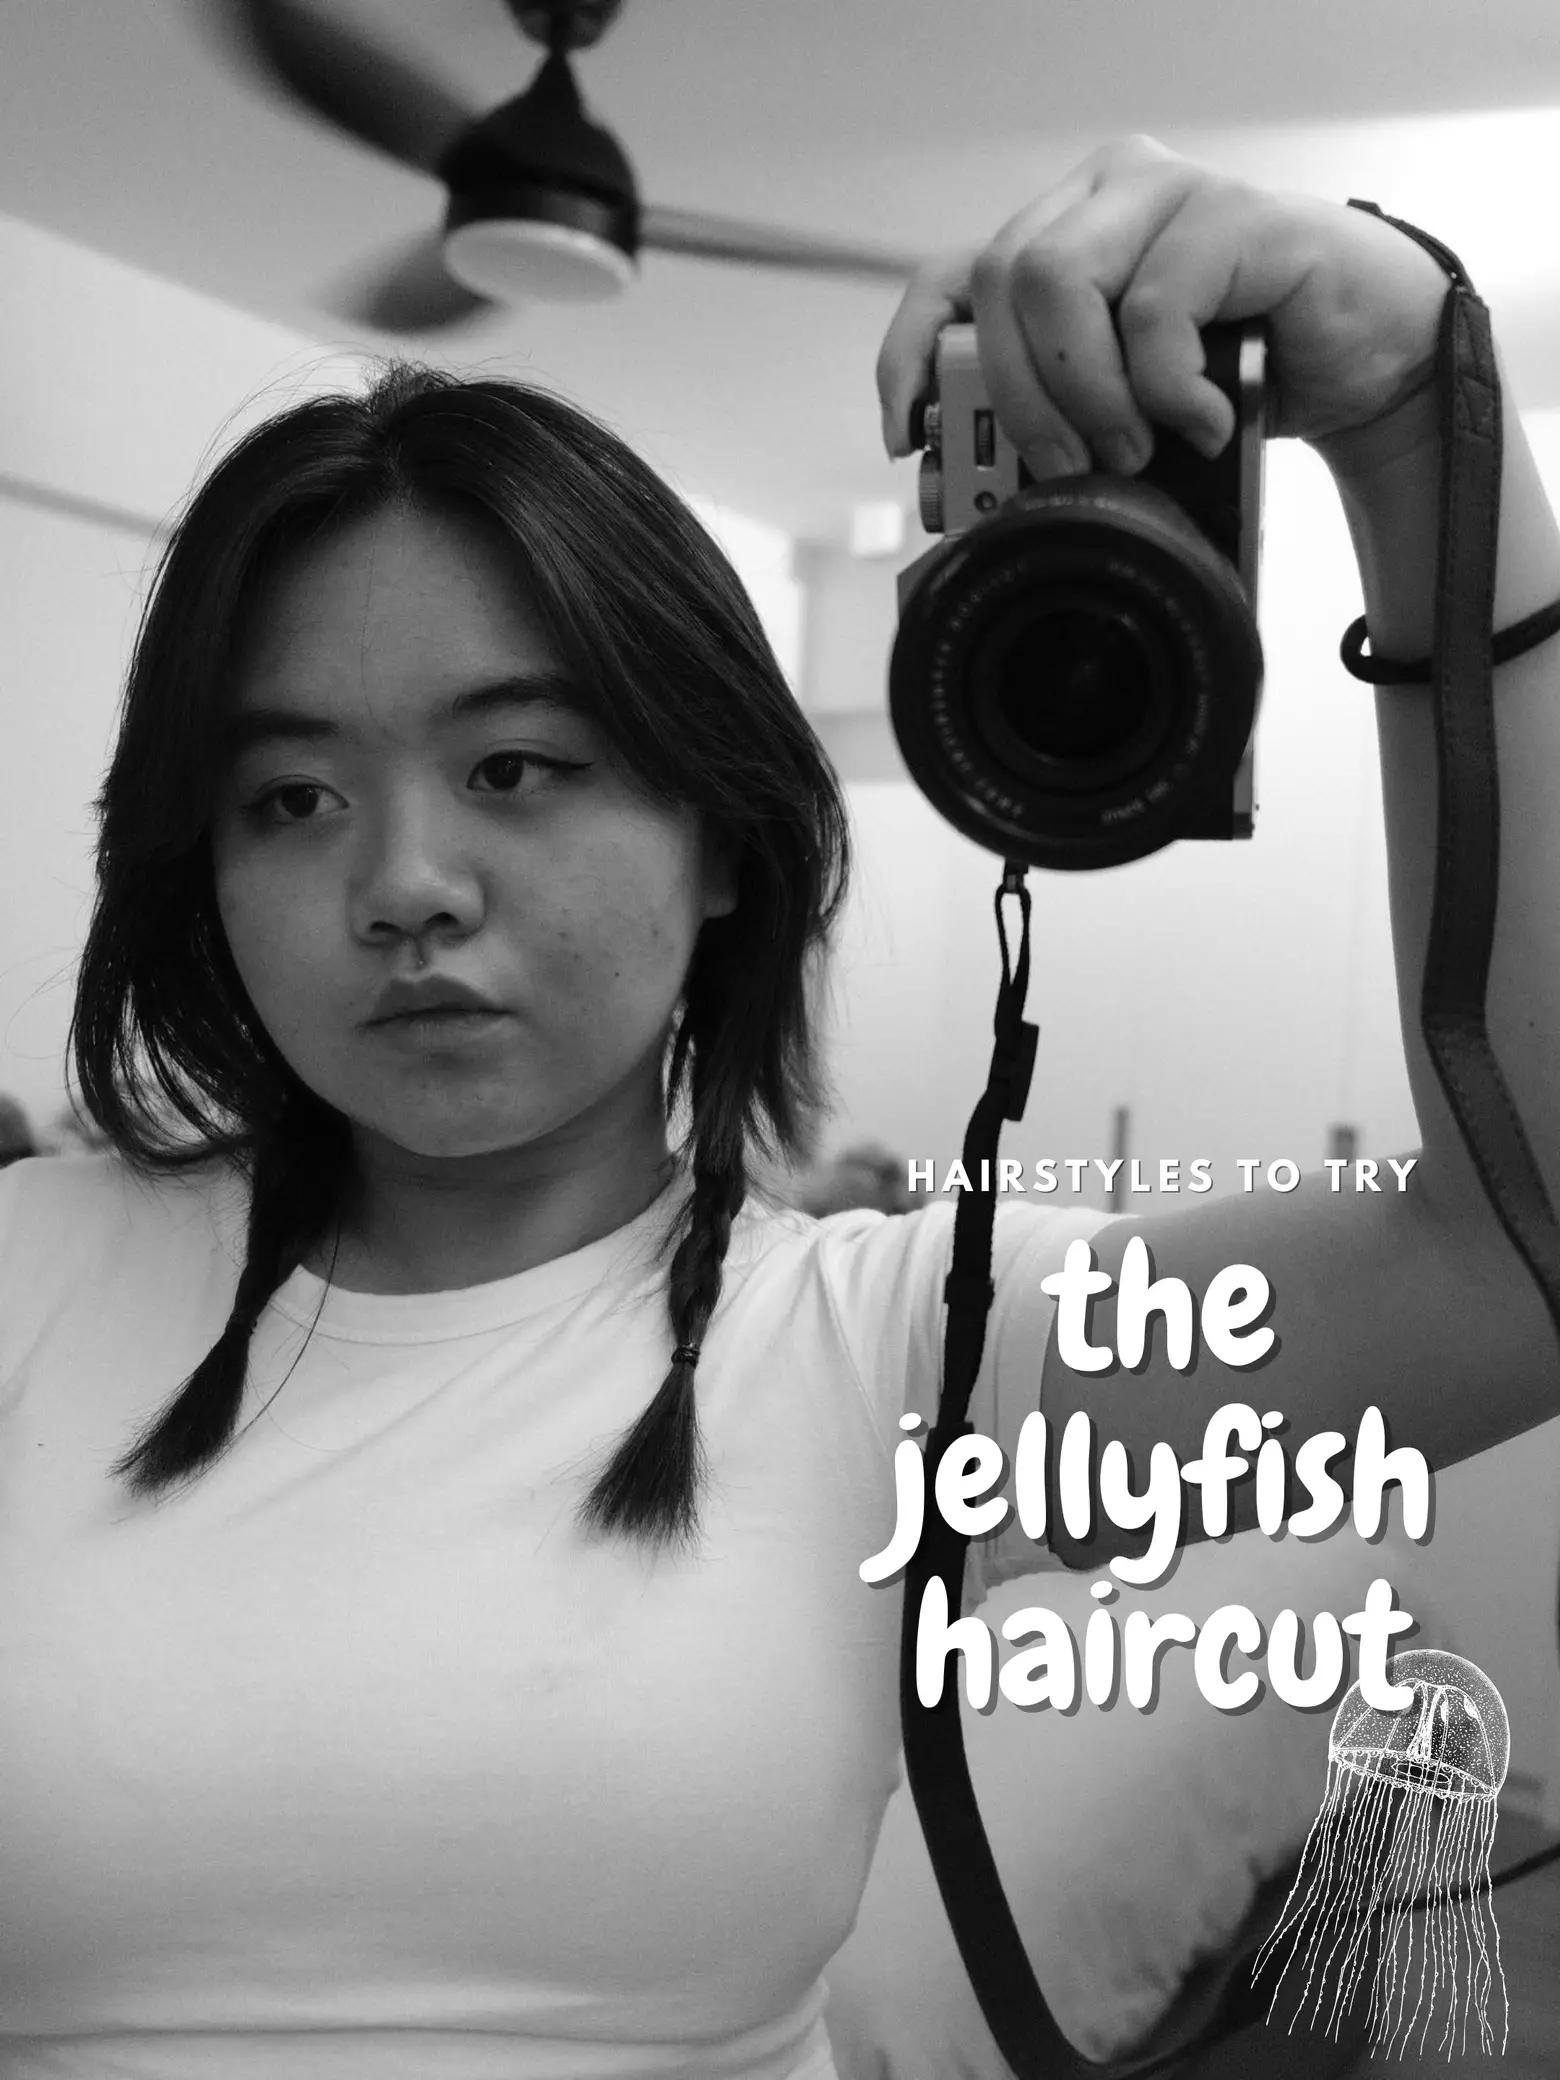 The Jellyfish Haircut Trend Is Making Waves on TikTok